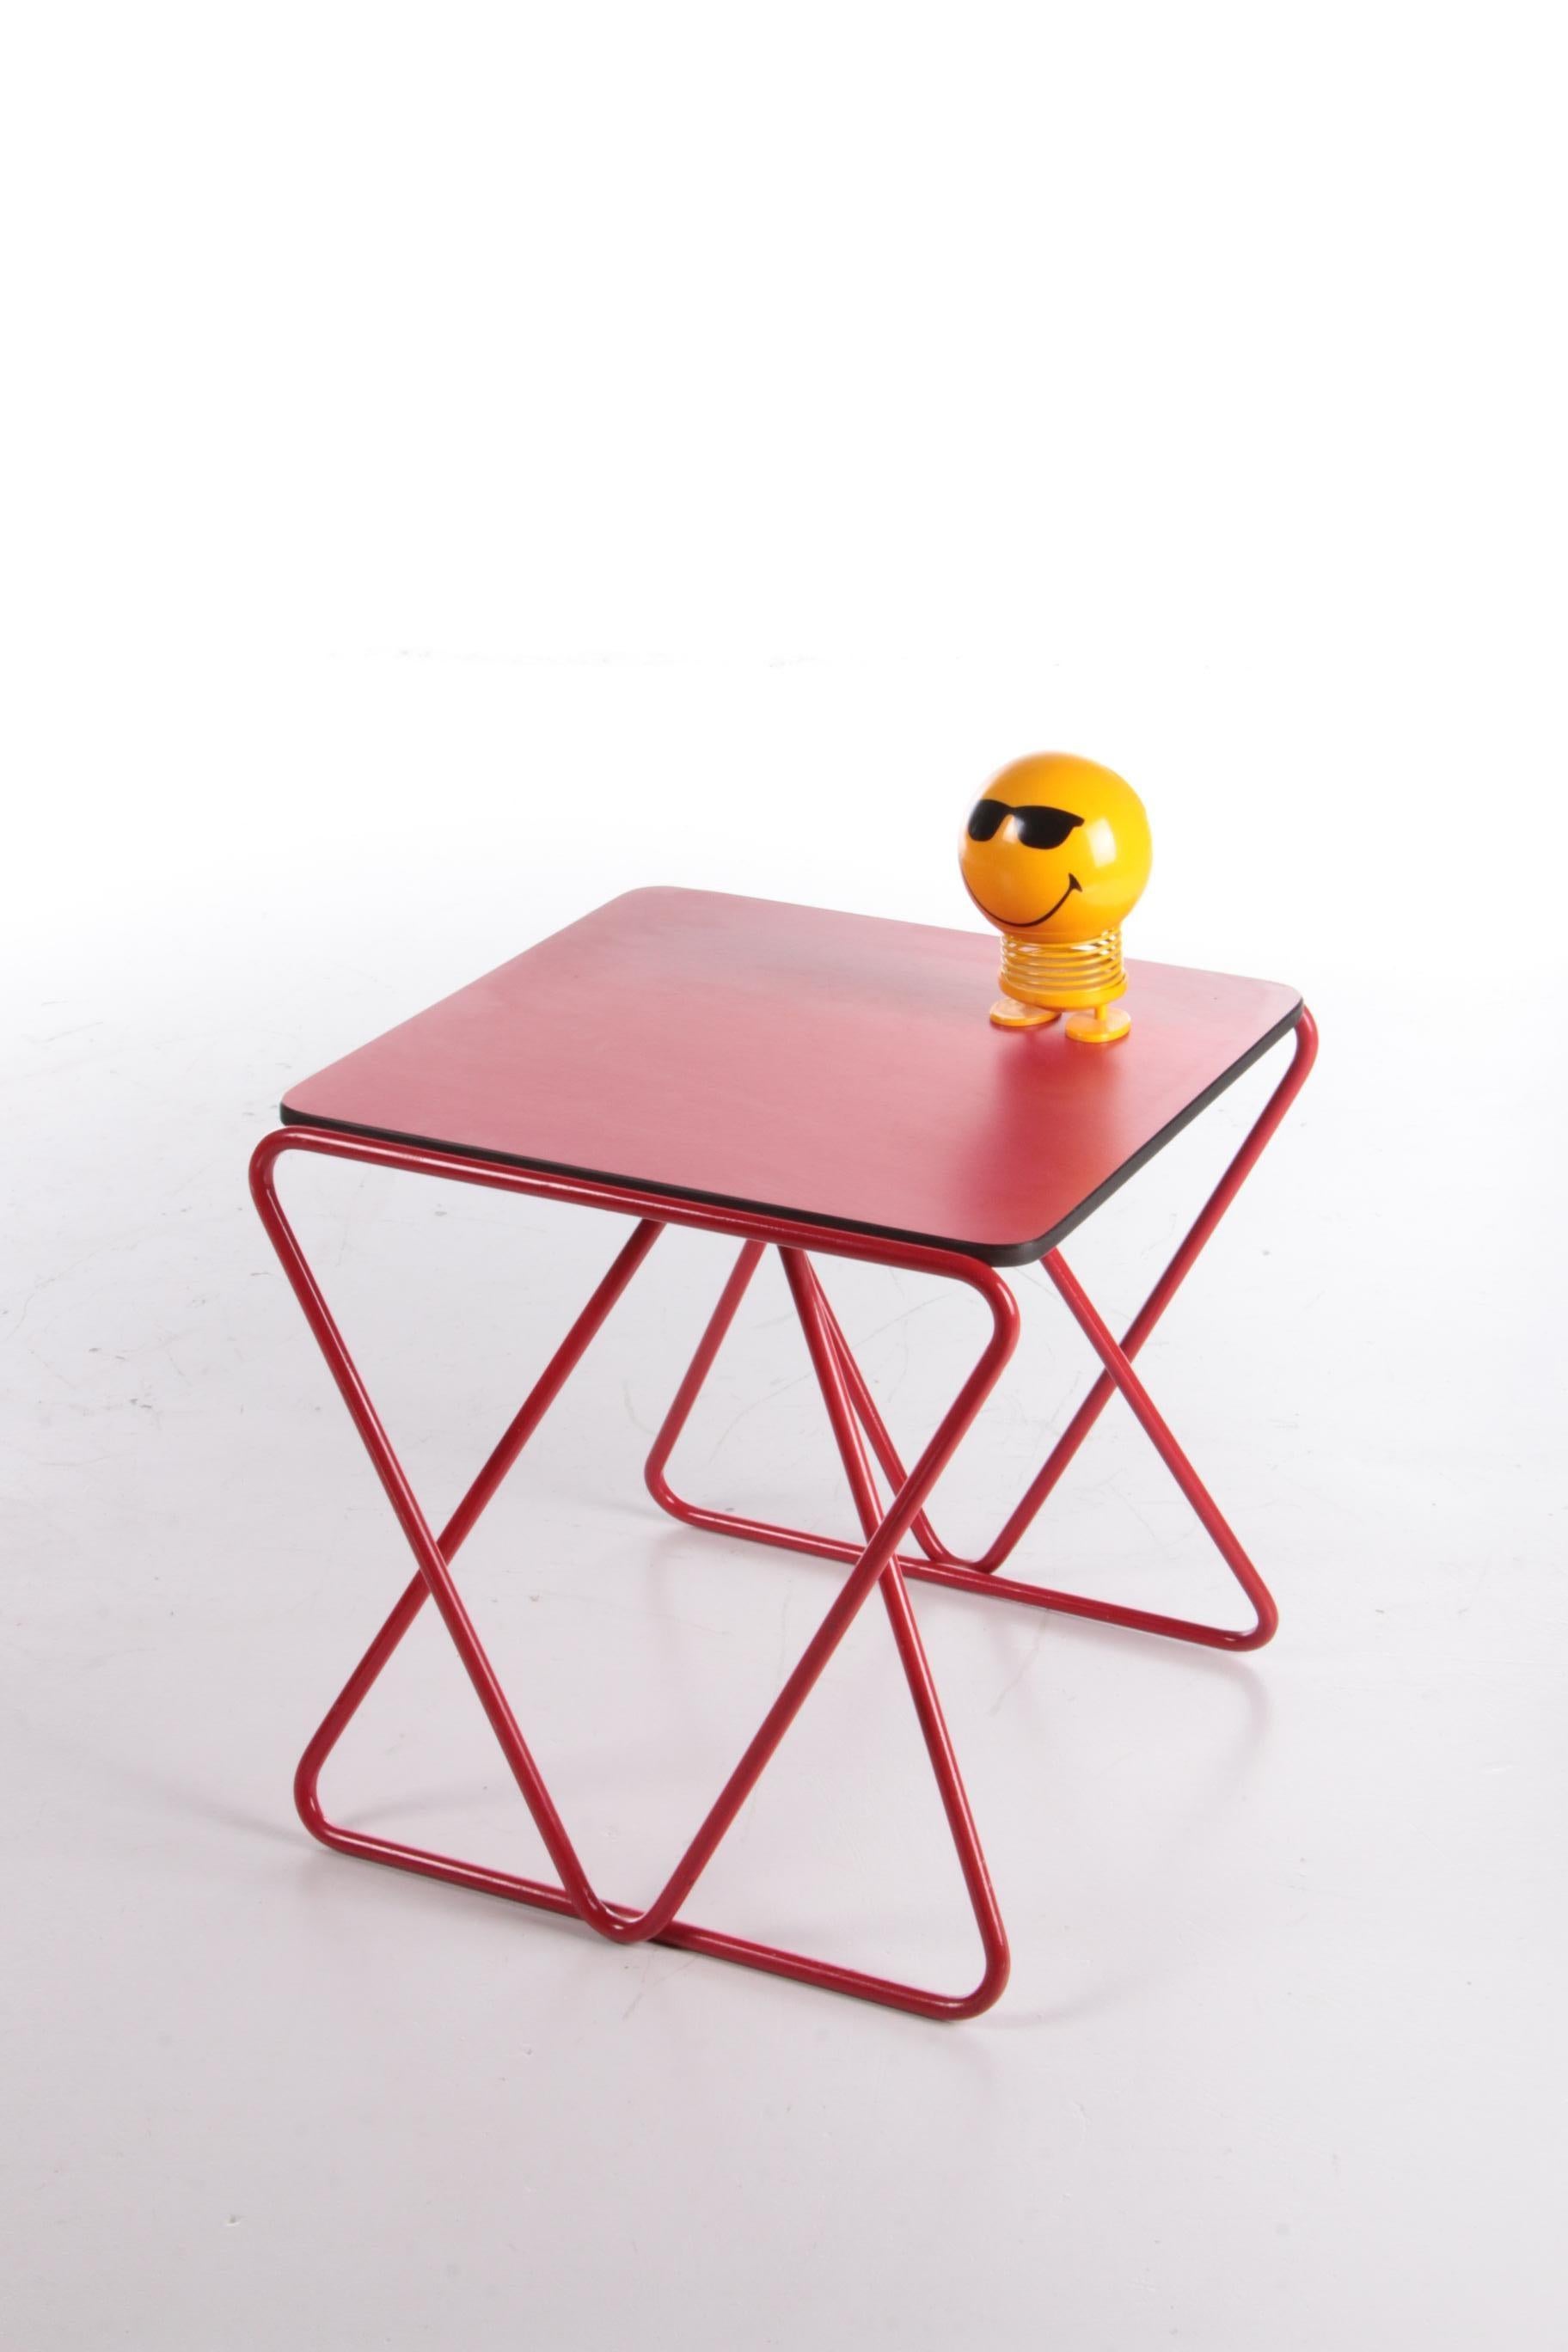 Rare side table designed by Walter Antonis for I-Form, Holland, 1978.

This table was one of Walter Antonis' last designs when he started his own company I-Form after leaving 't Spectrum.

Only 40 tables were made in 3 sizes, this is the